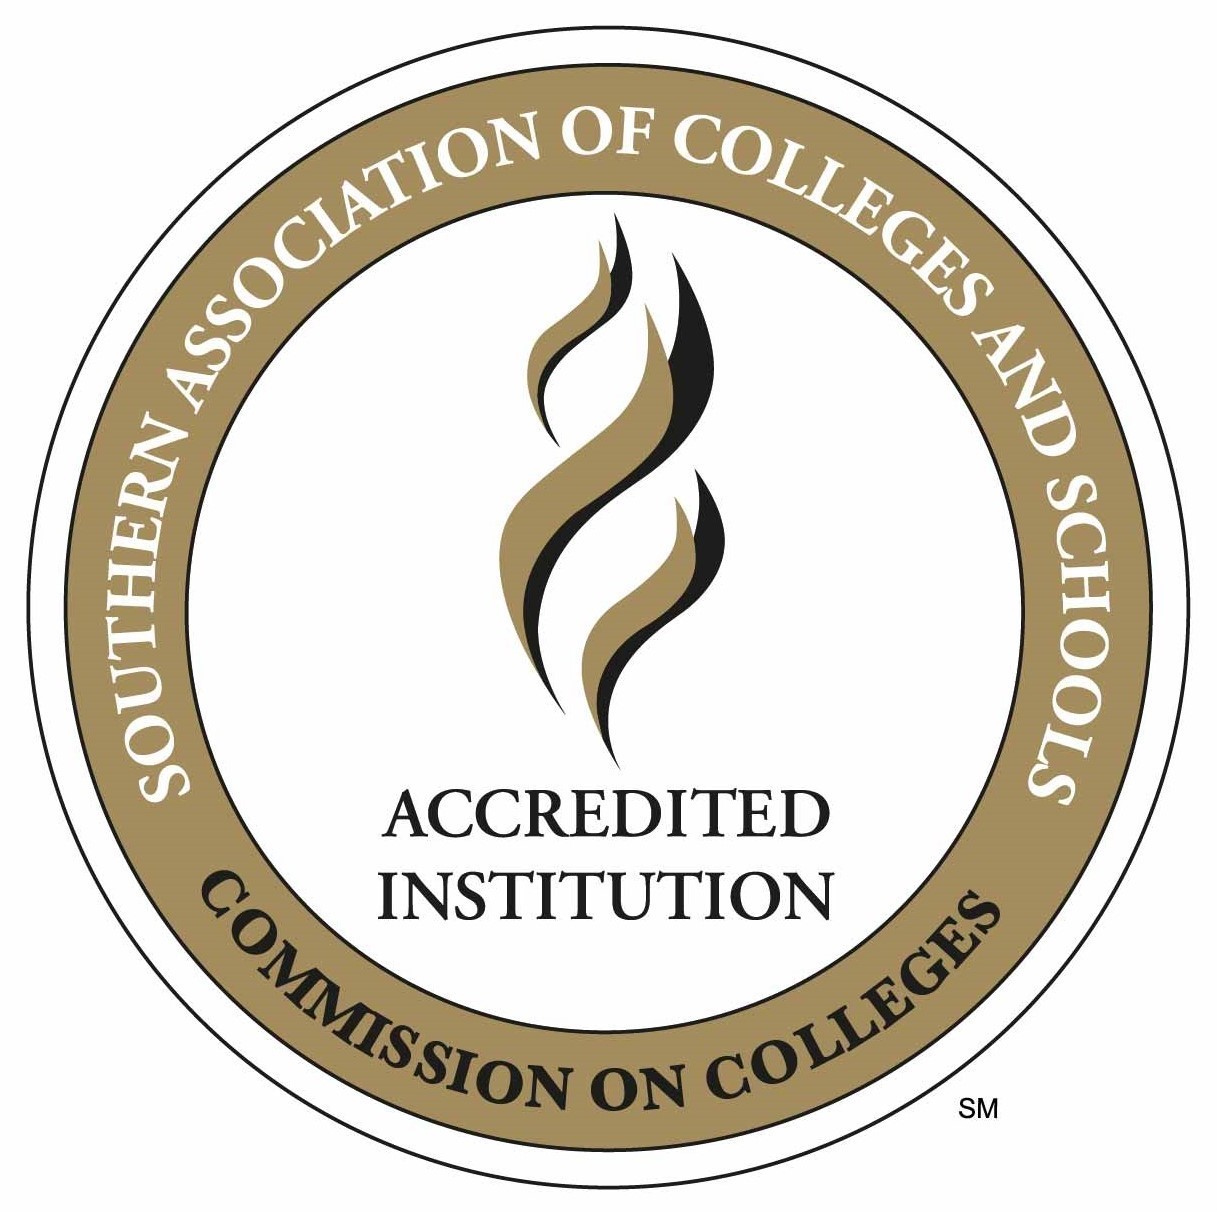 Southern Association of Colleges and Schools Commission on Colleges (SACSCOC) logo